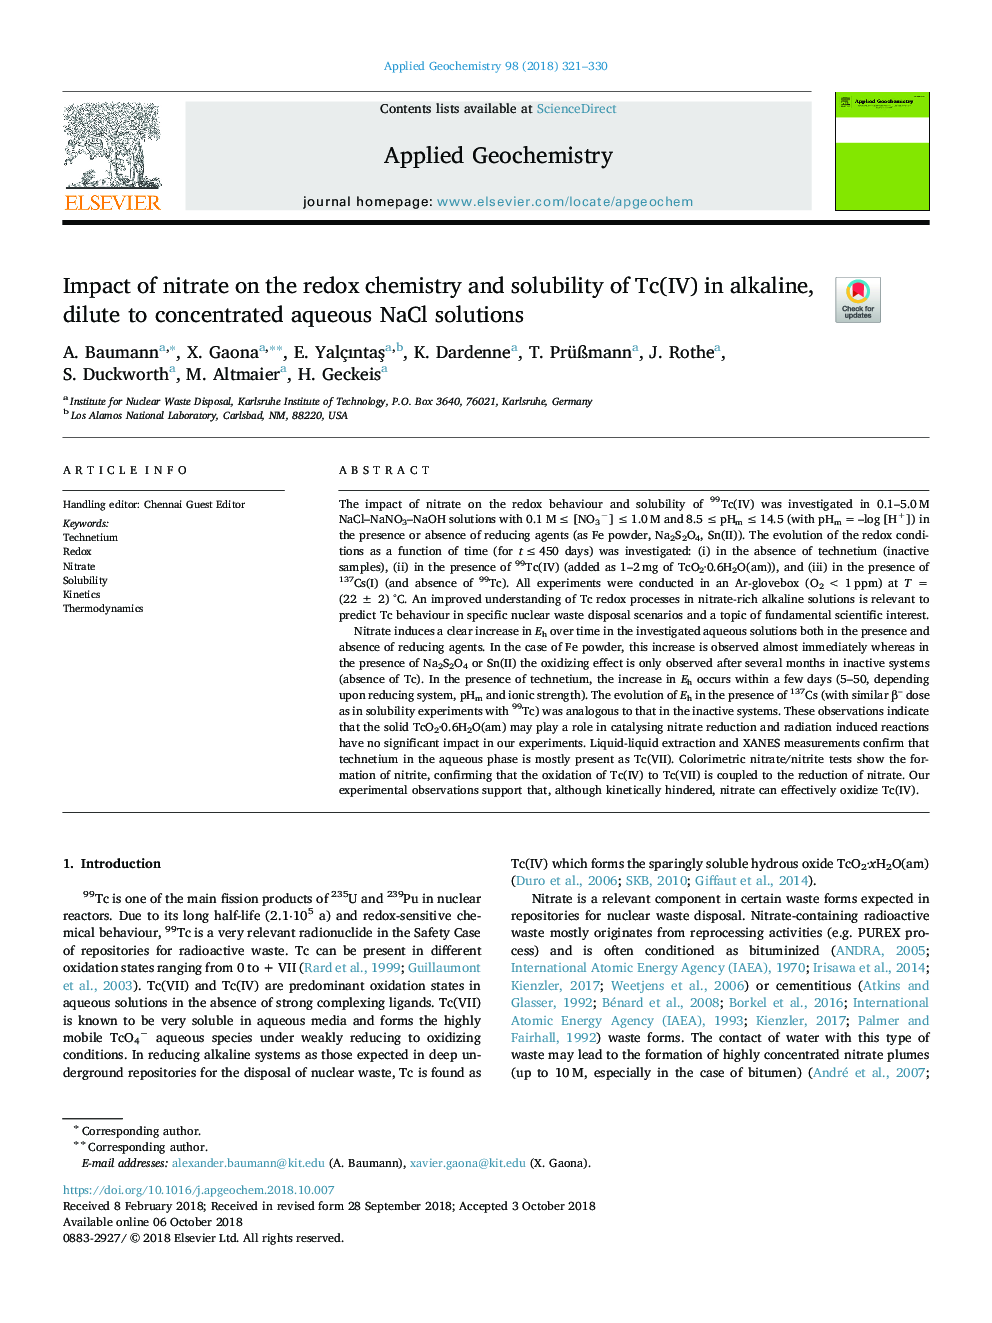 Impact of nitrate on the redox chemistry and solubility of Tc(IV) in alkaline, dilute to concentrated aqueous NaCl solutions